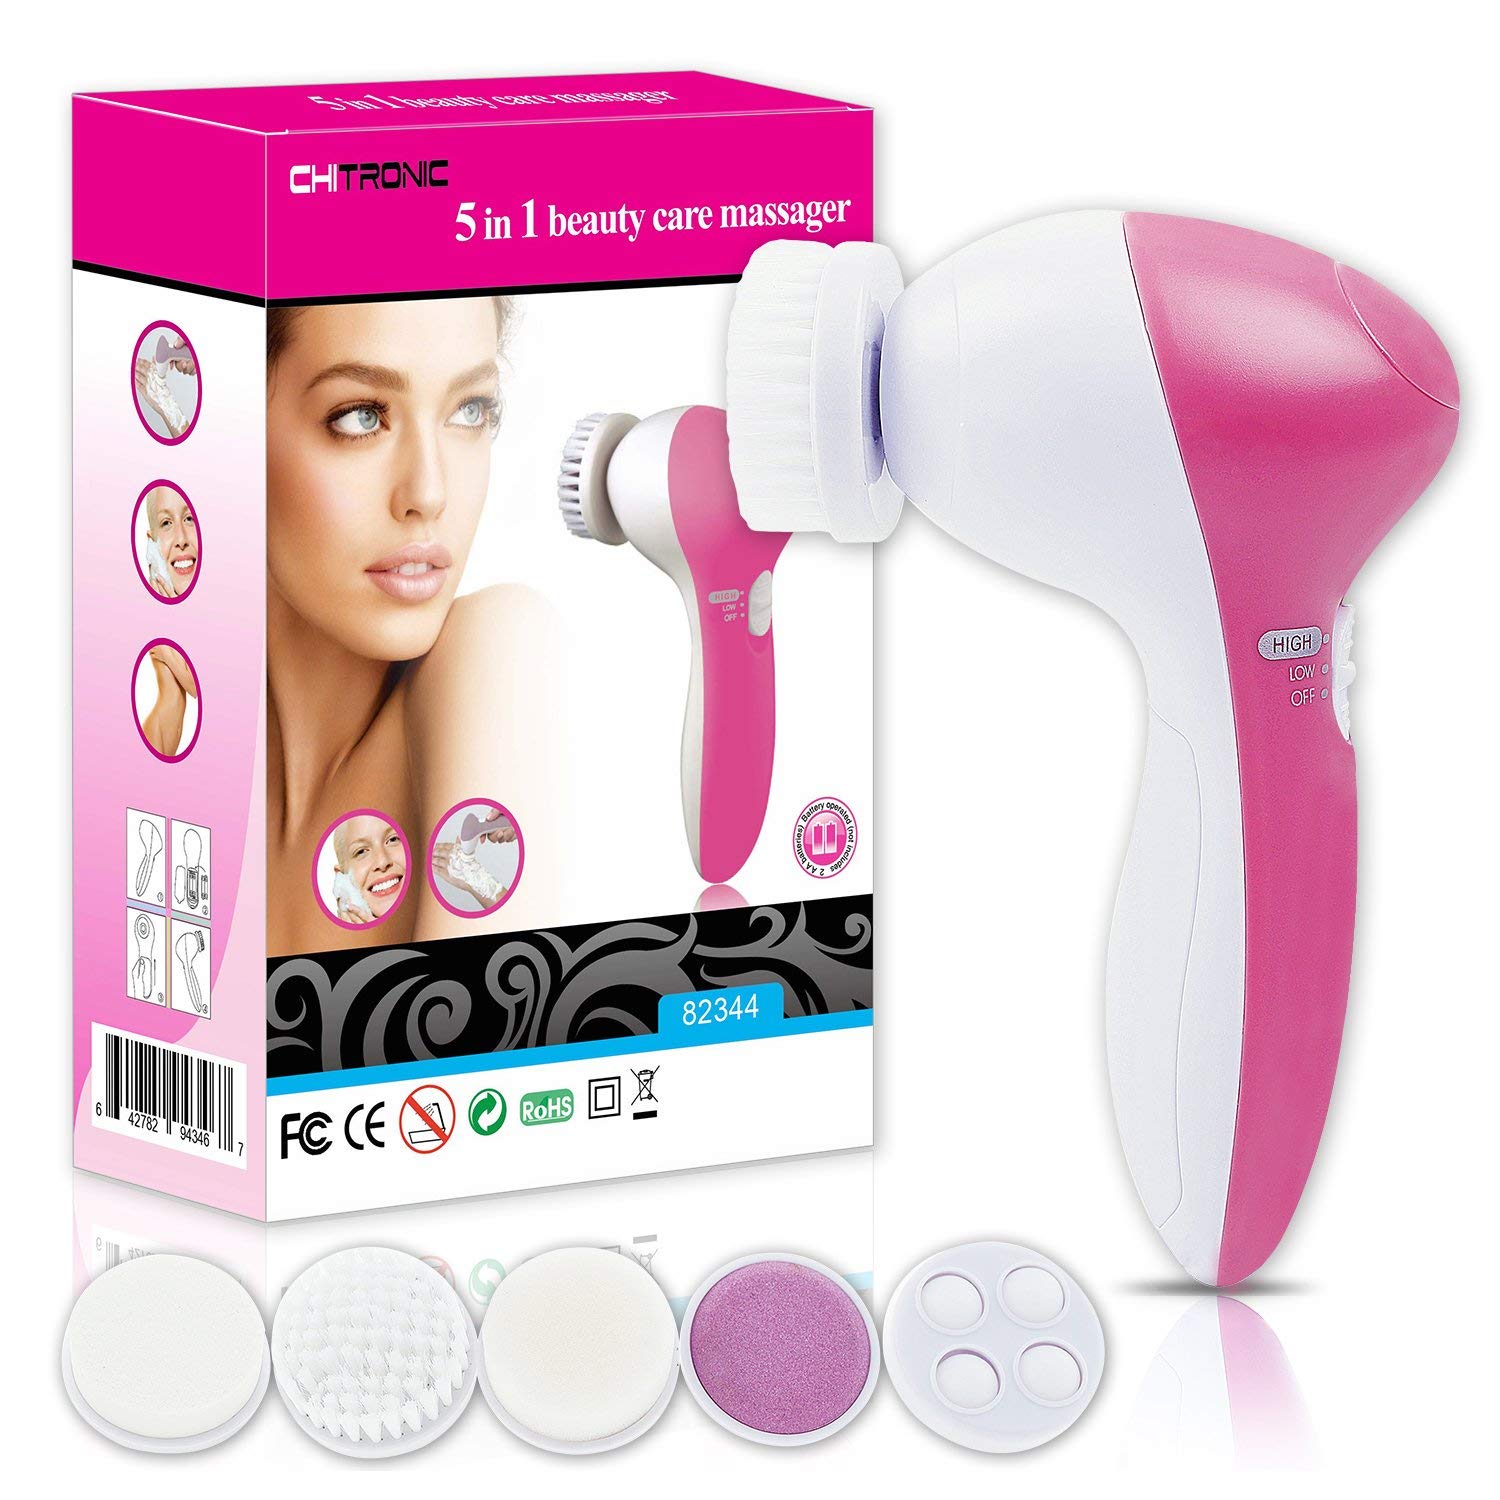 ChiTronic 82344 5 in 1 Multi Function Portable Facial Skin Care